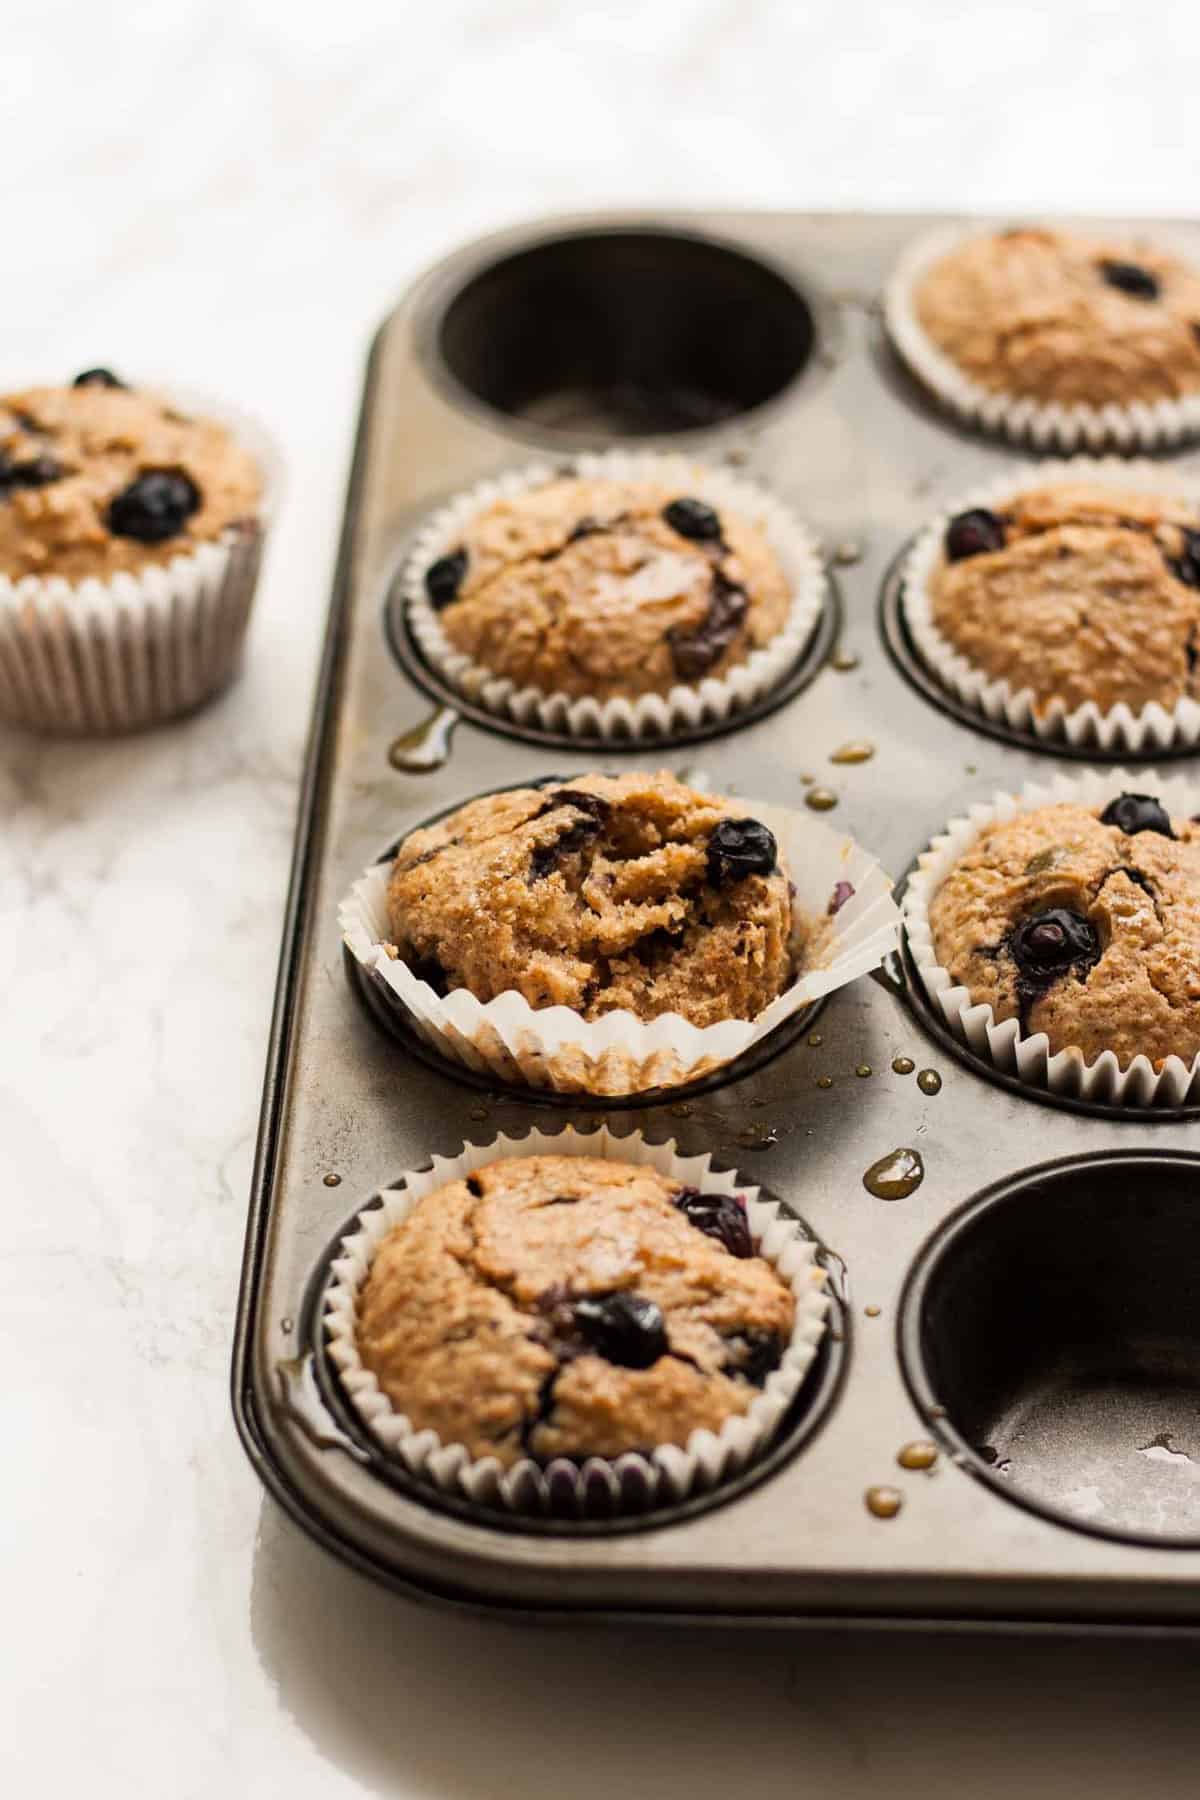 A muffin tray with a blueberry muffin peeled out its case with a bite taken out.